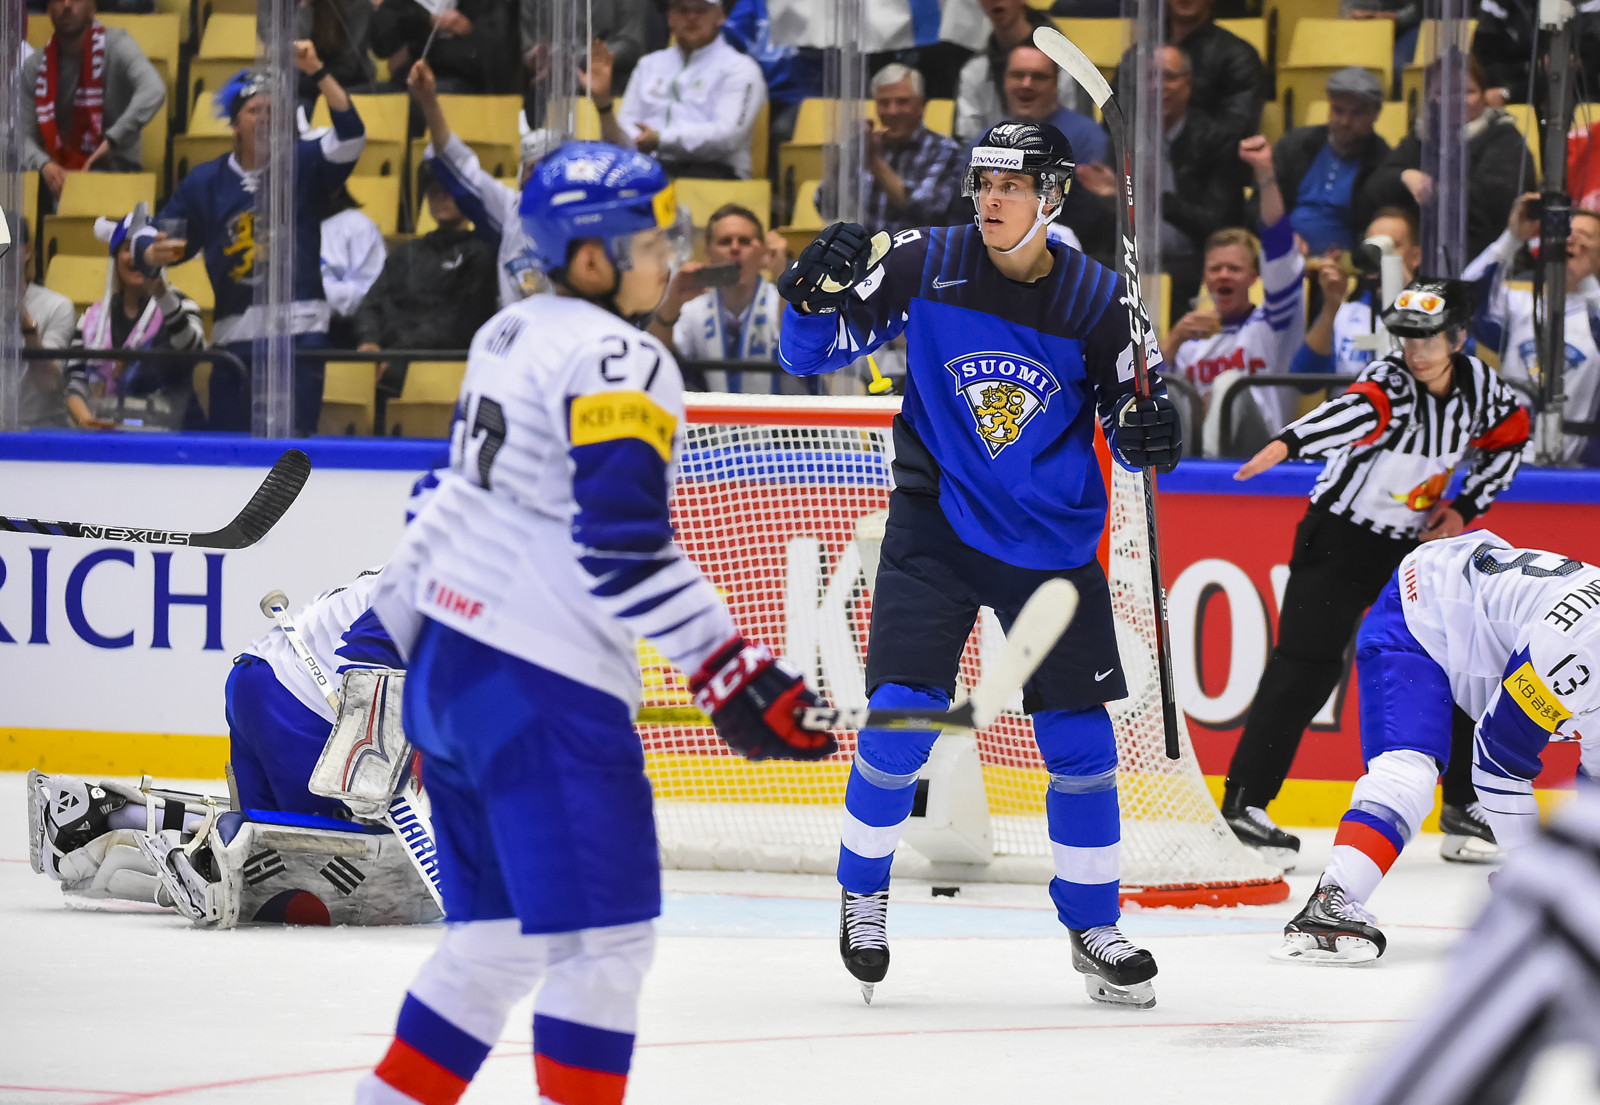 South Korea found the going tough in their opening IIHF World Championship group match as they lost 8-1 to Finland ©IIHF